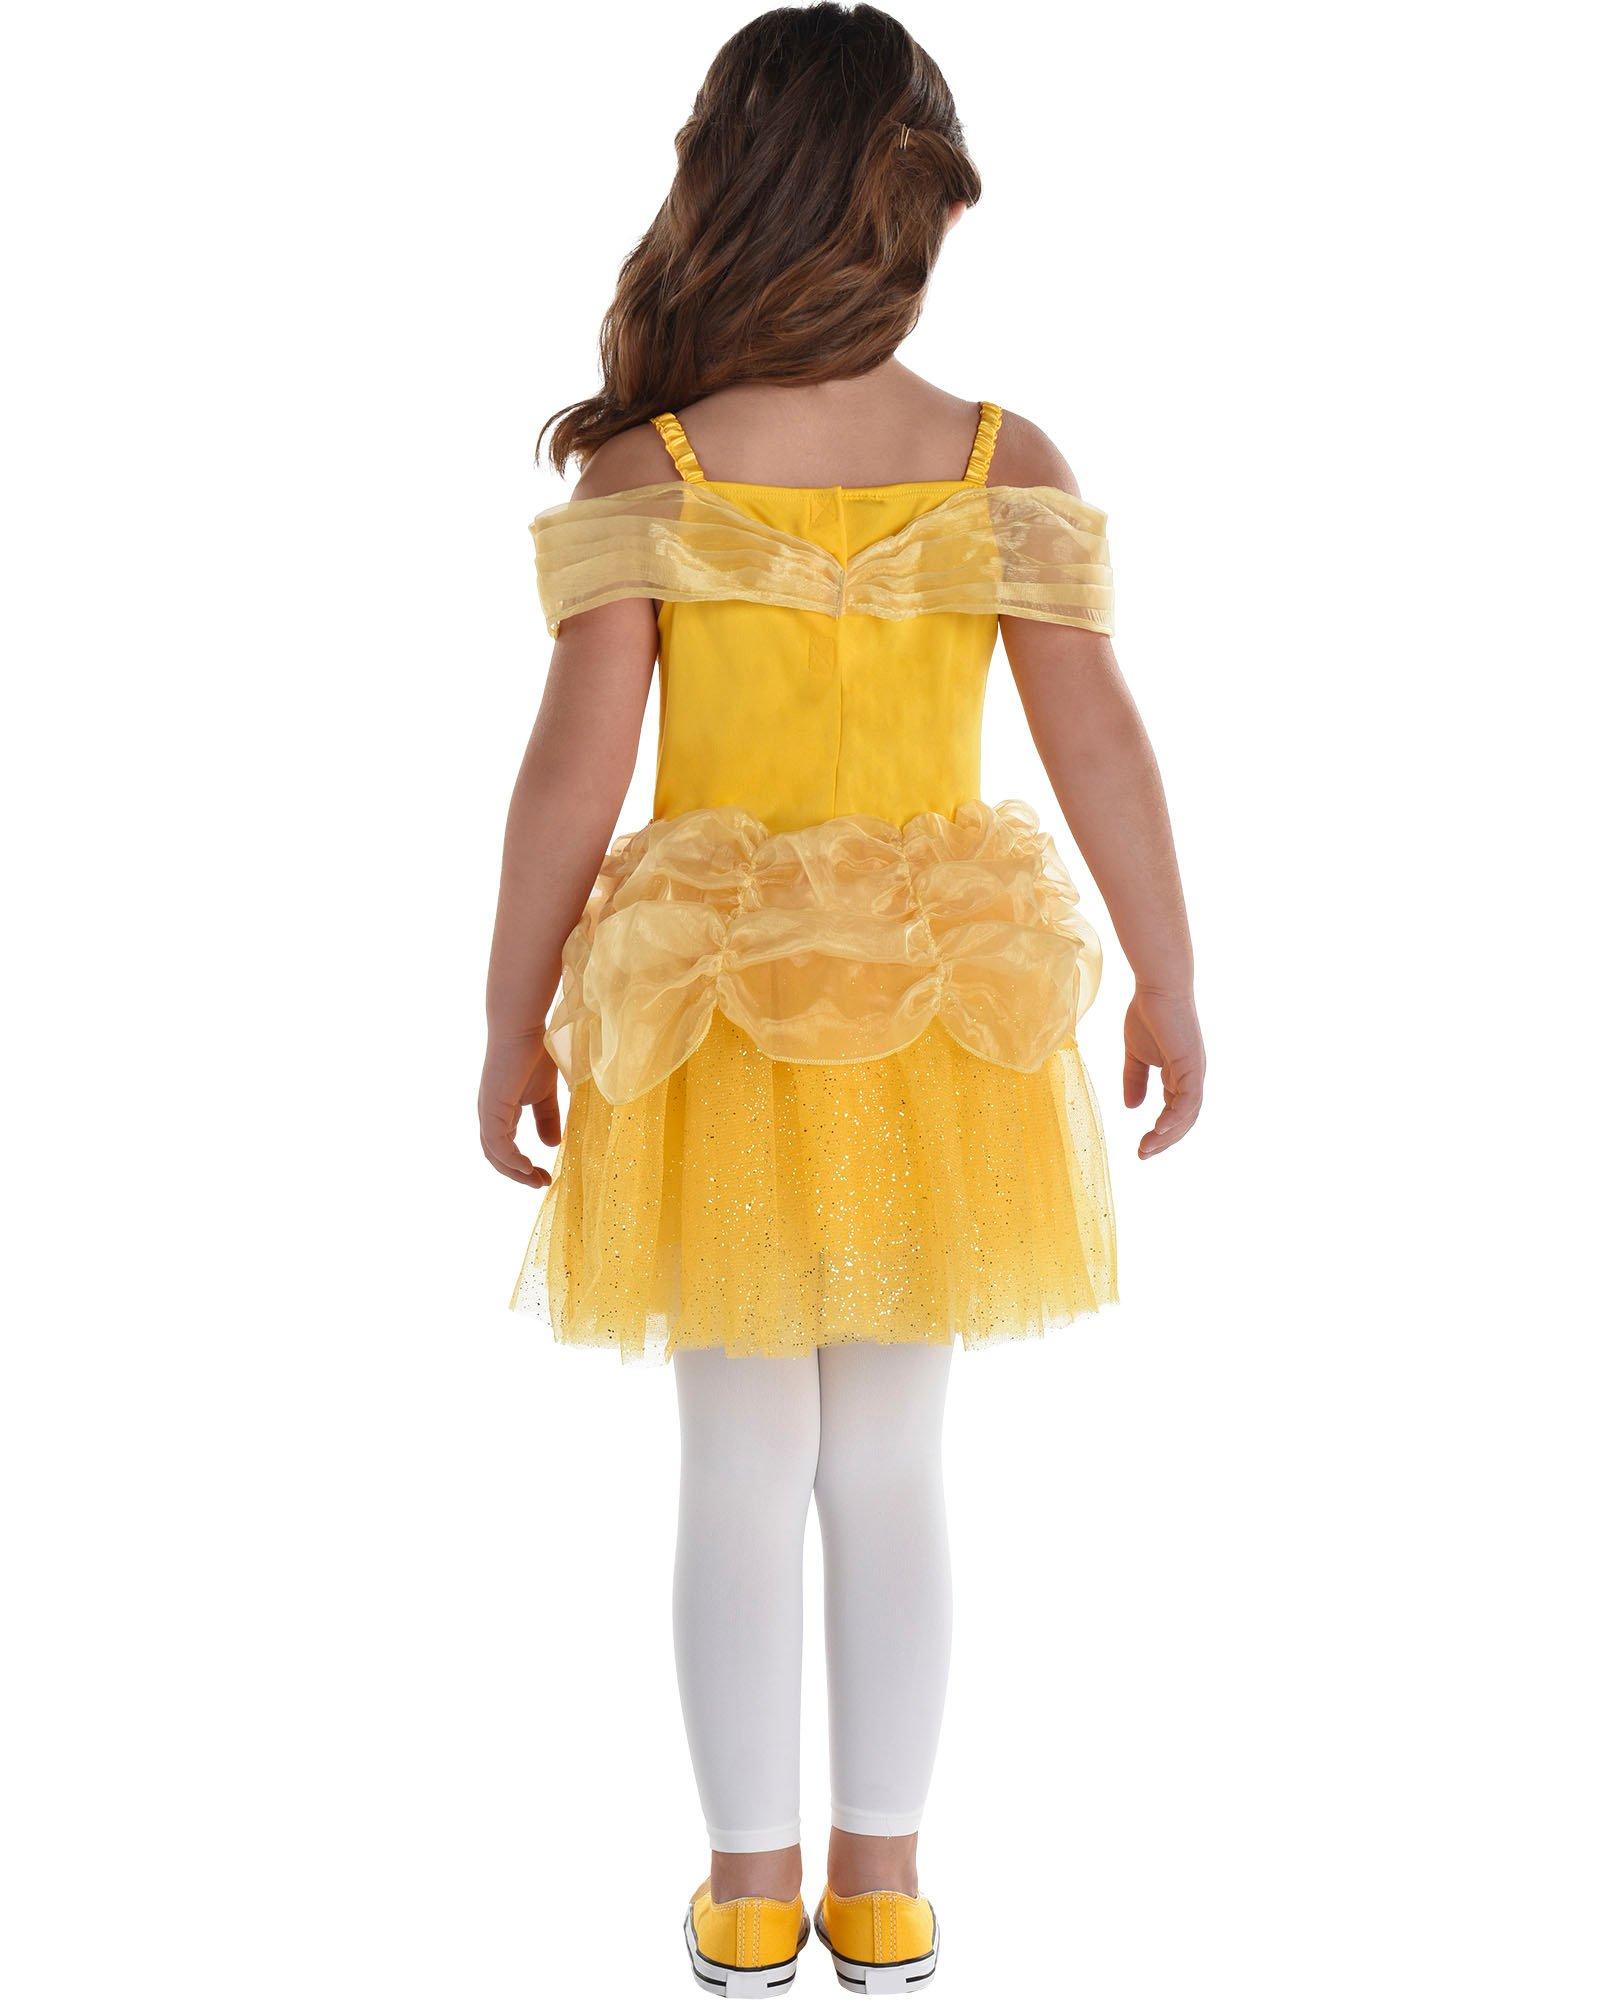 Belle Dress / Disney Princess Dress Beauty and the Beast Belle Costume /  Yellow Dress / for Toddler, Child, Girl / Princess Costume -  Canada